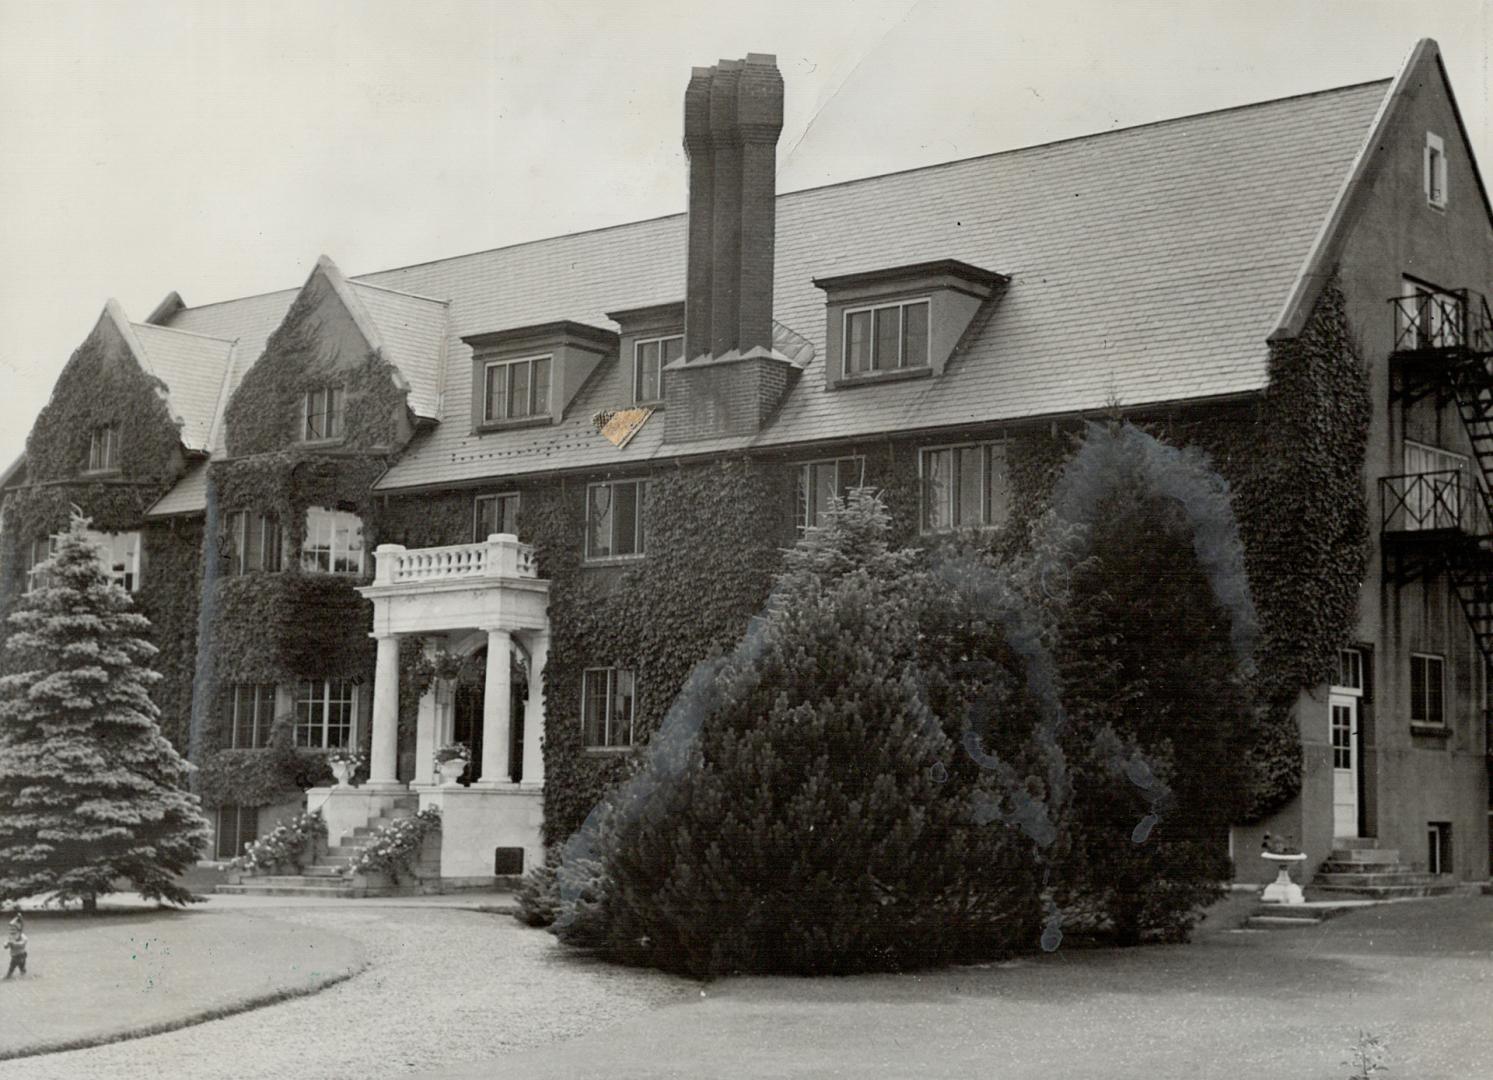 The front view of the Foresters' home is shown (RIGHT)